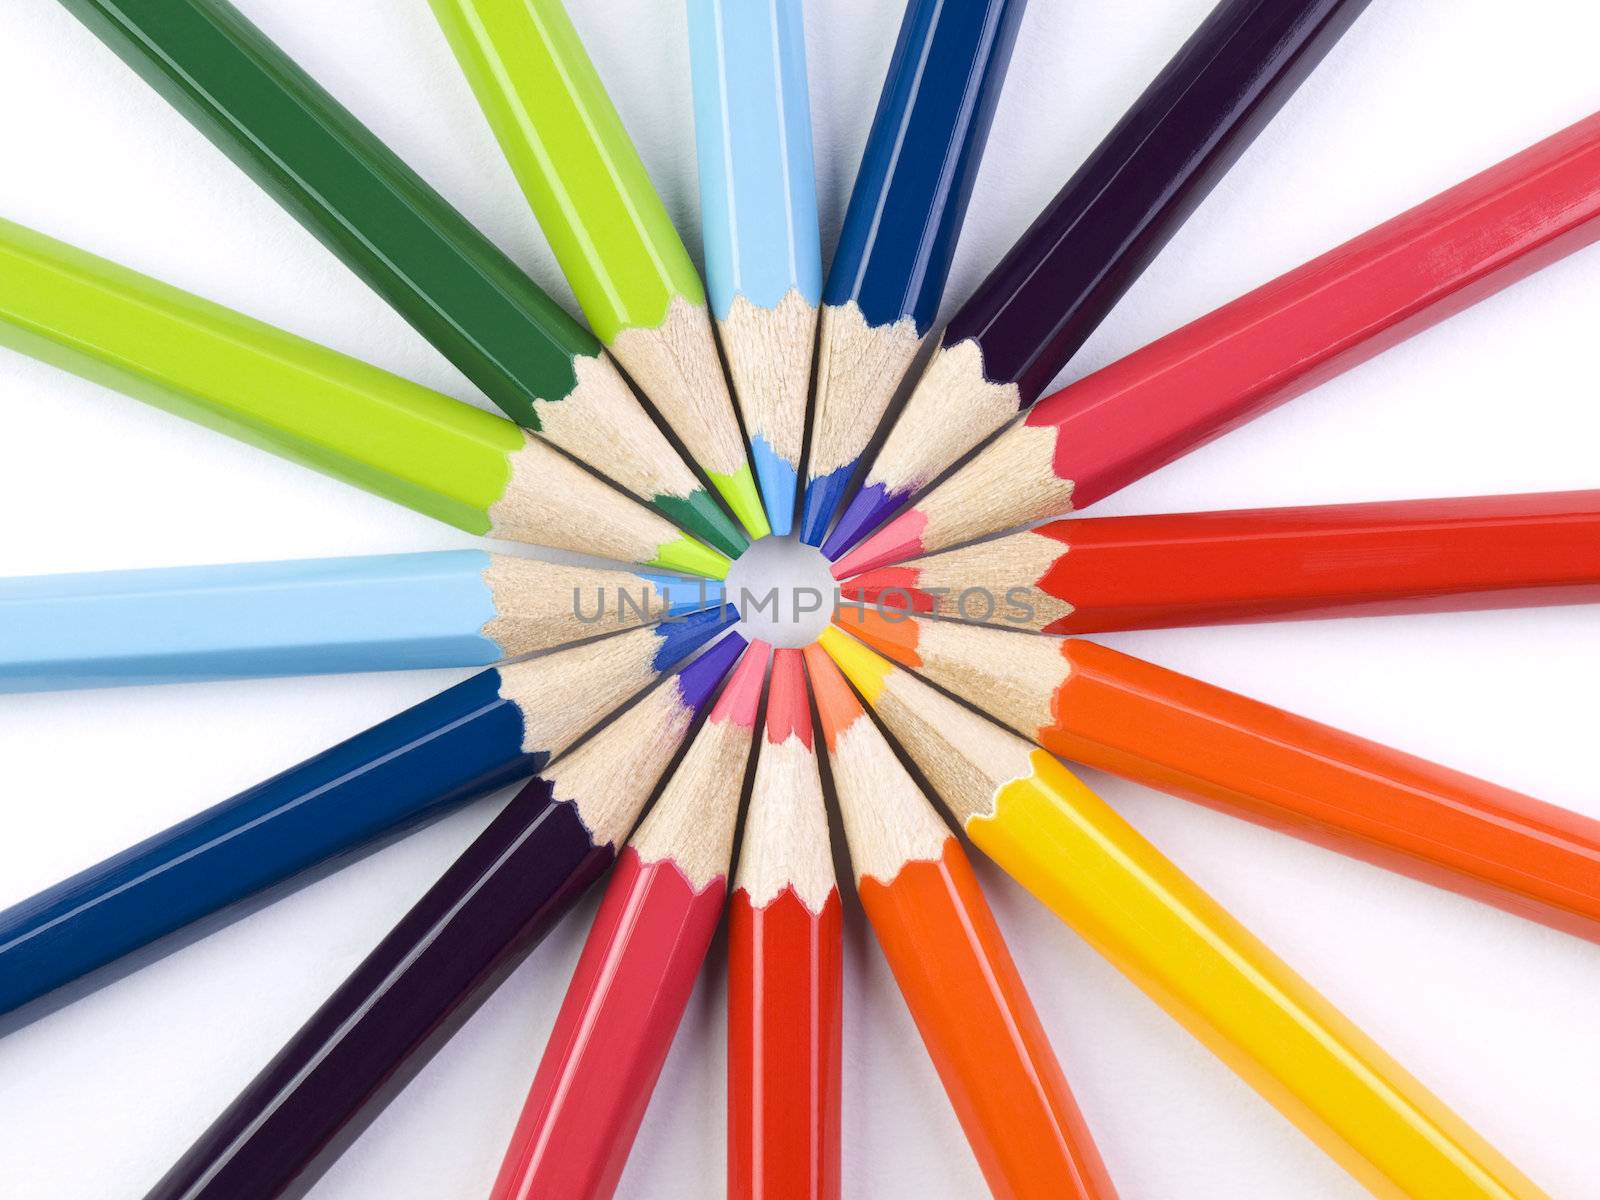 A circle formed by the points of several colored pencils.